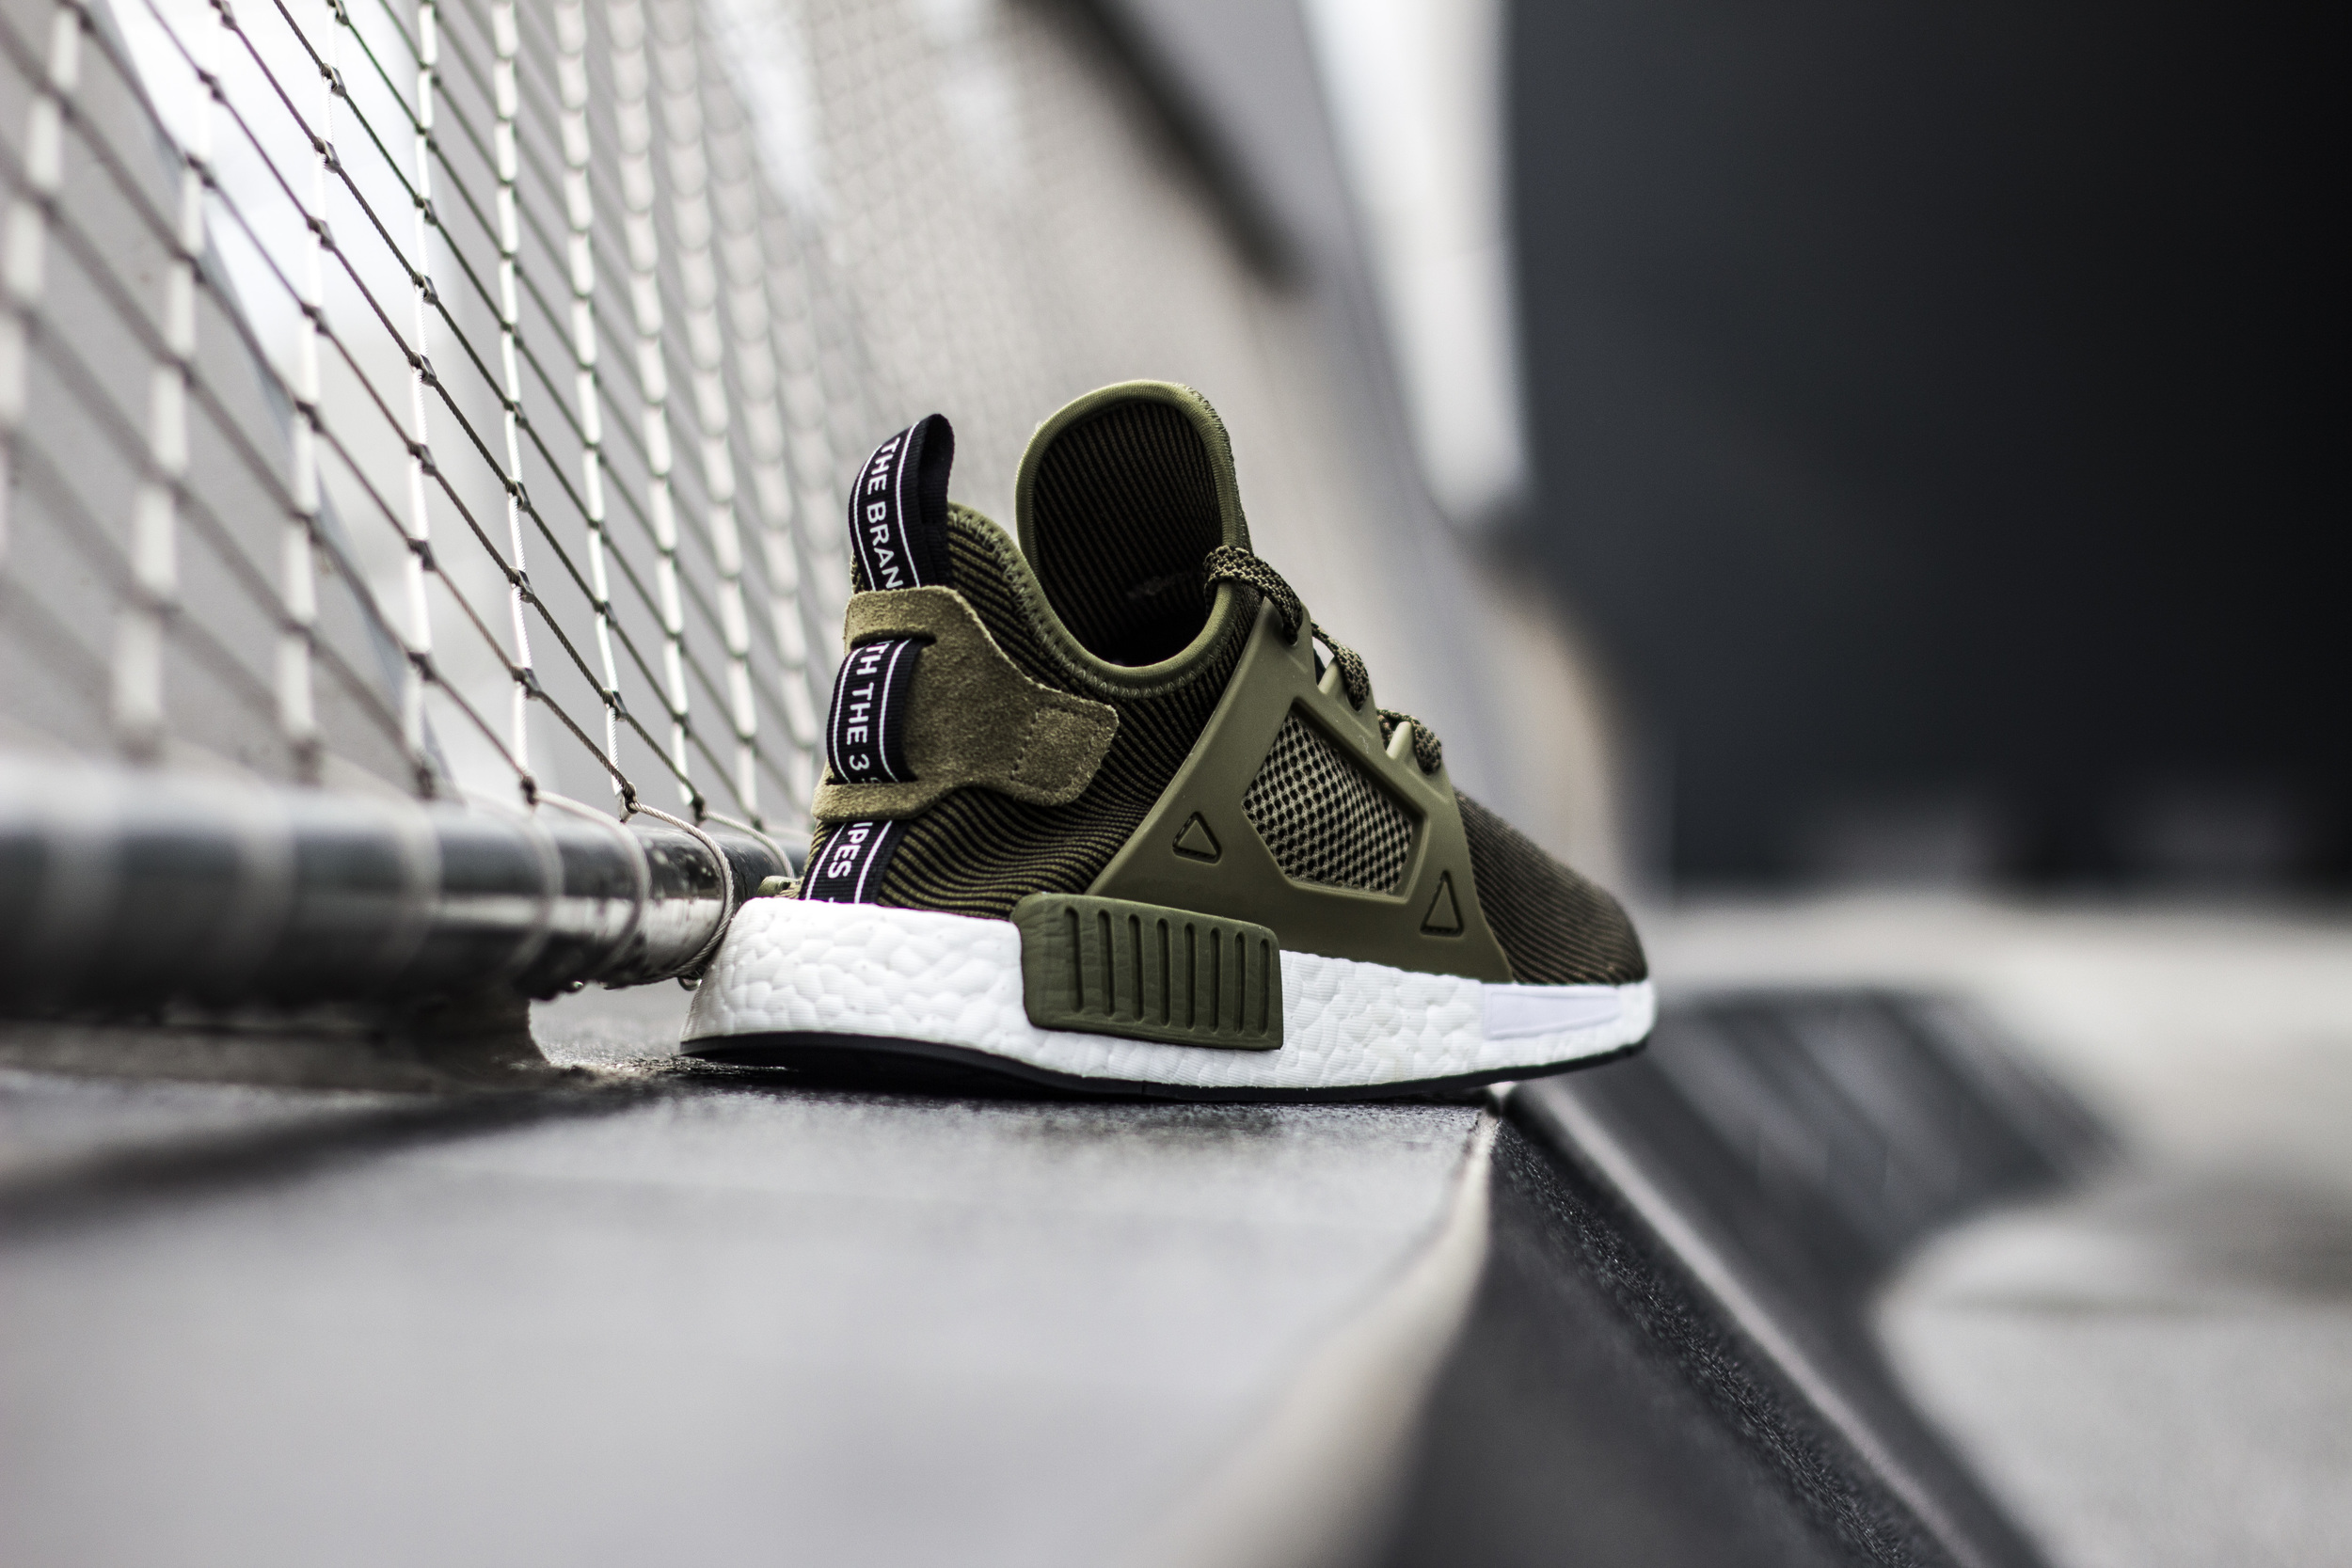 Detailed Adidas NMD XR1 "Olive" — Sneaker Shouts